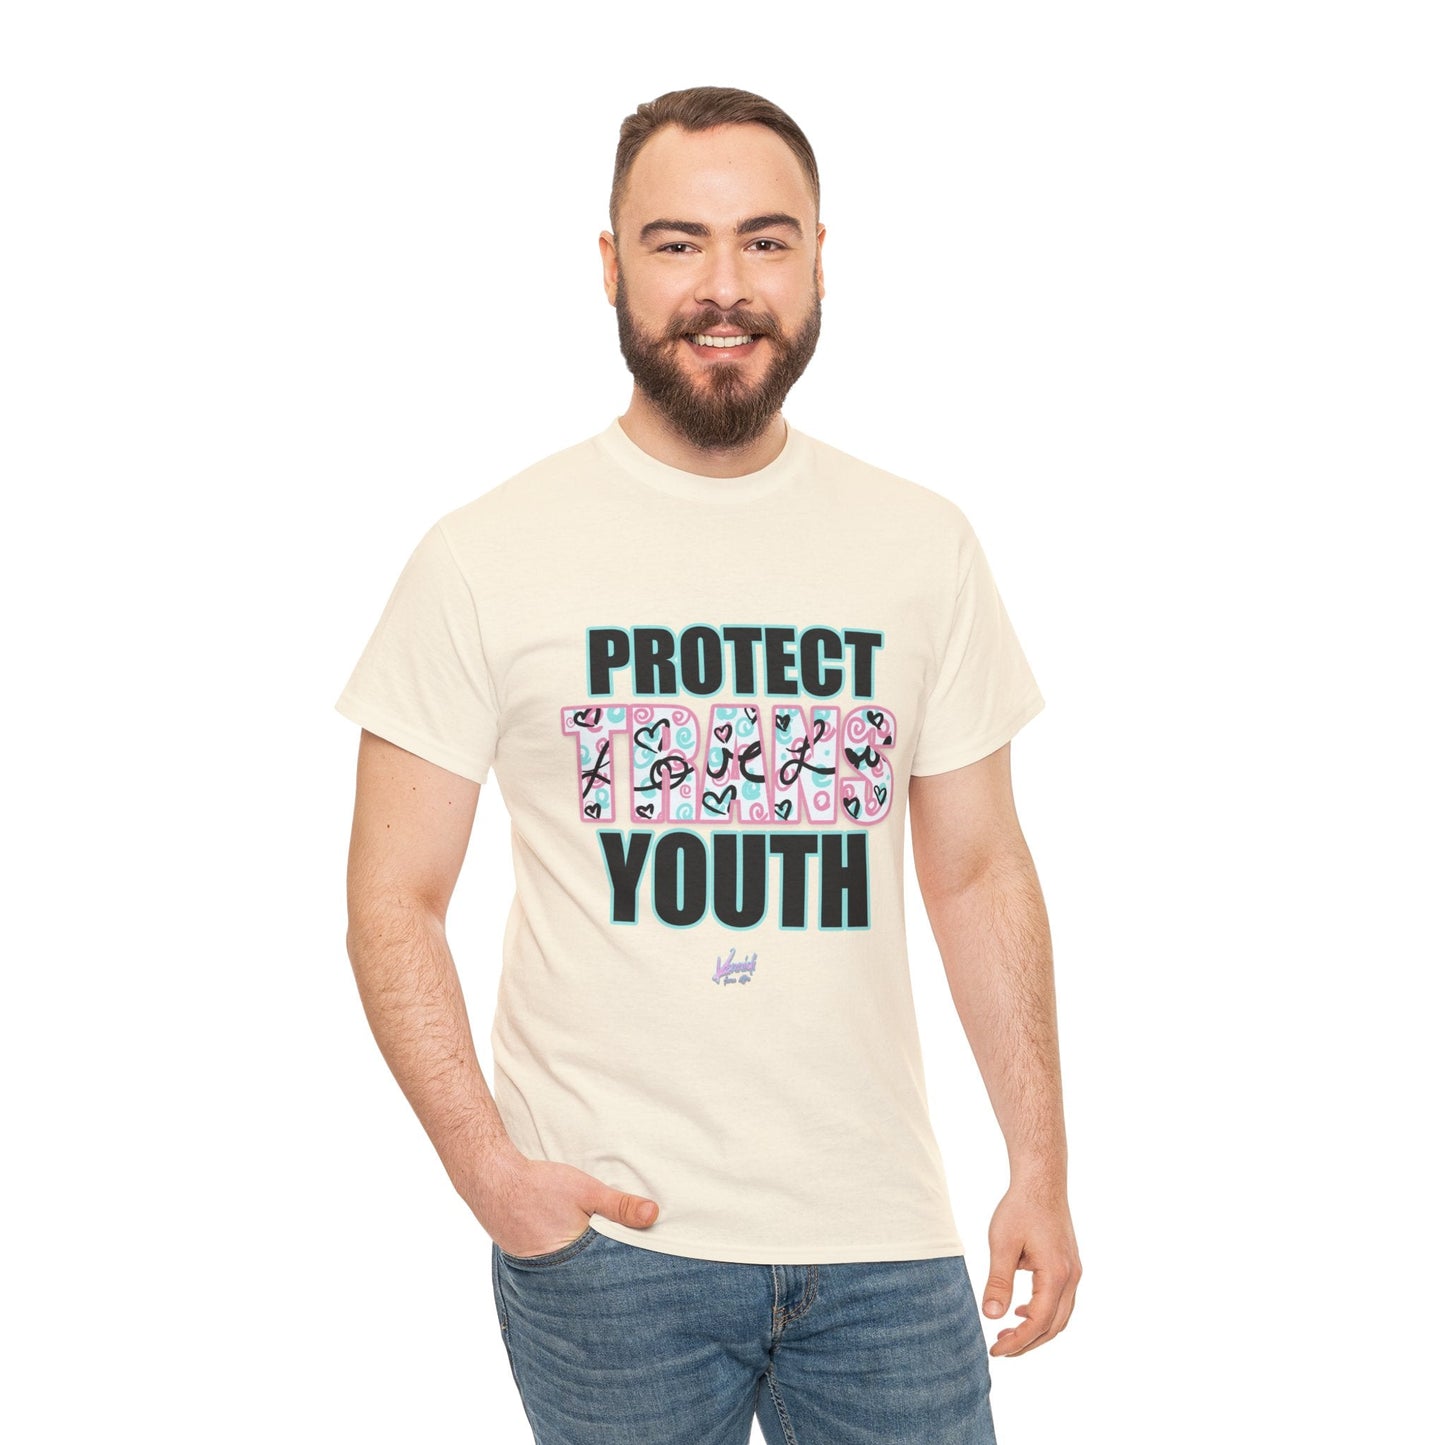 Protect Trans Youth Love 3.0 Unisex Heavy Cotton Tee - Natural / S T - Shirt